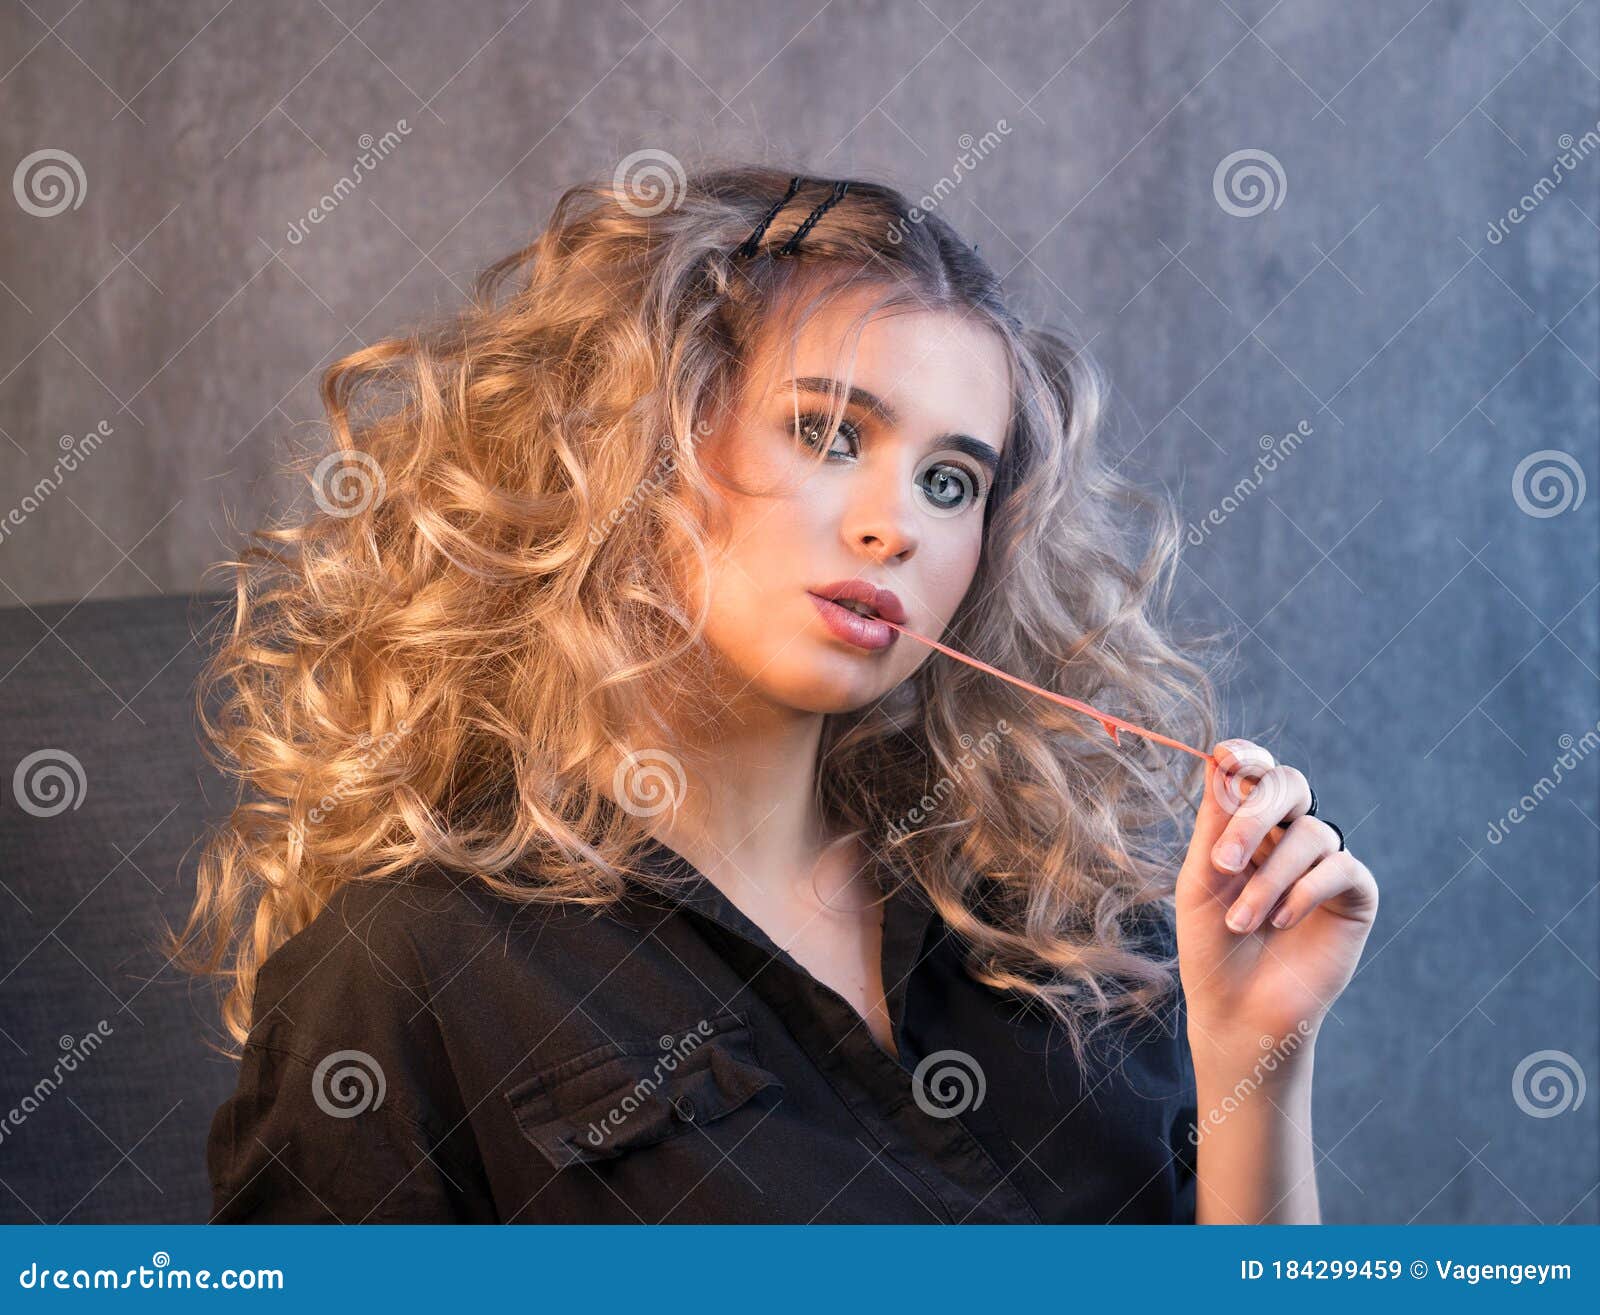 Girl Curly Hair. Image Beauty Salon Stock Image - Image of curls, barber:  184299459